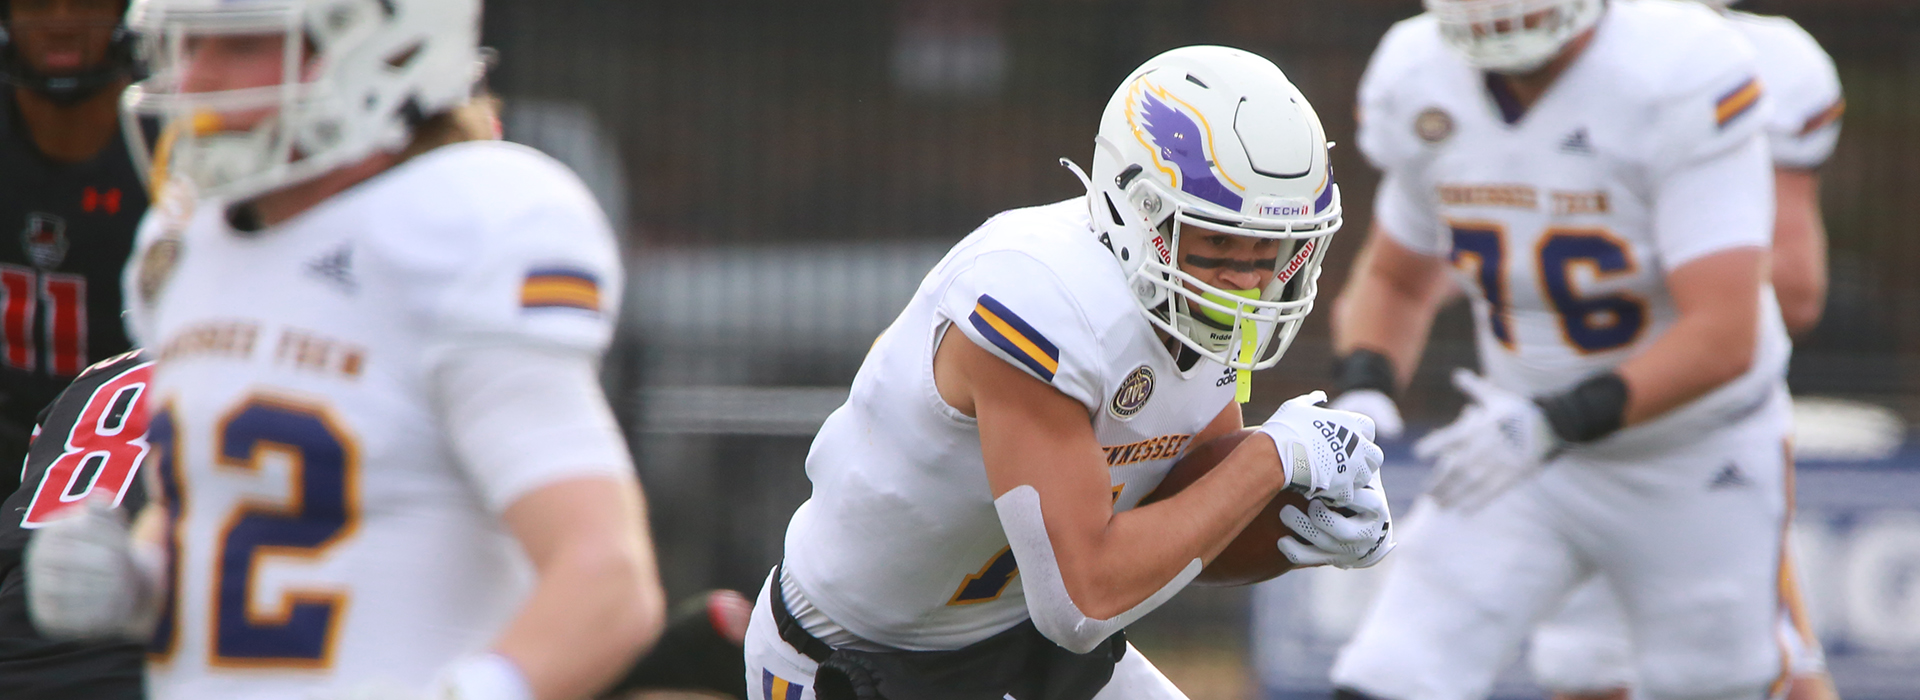 Golden Eagles close out 2021 with loss at Austin Peay